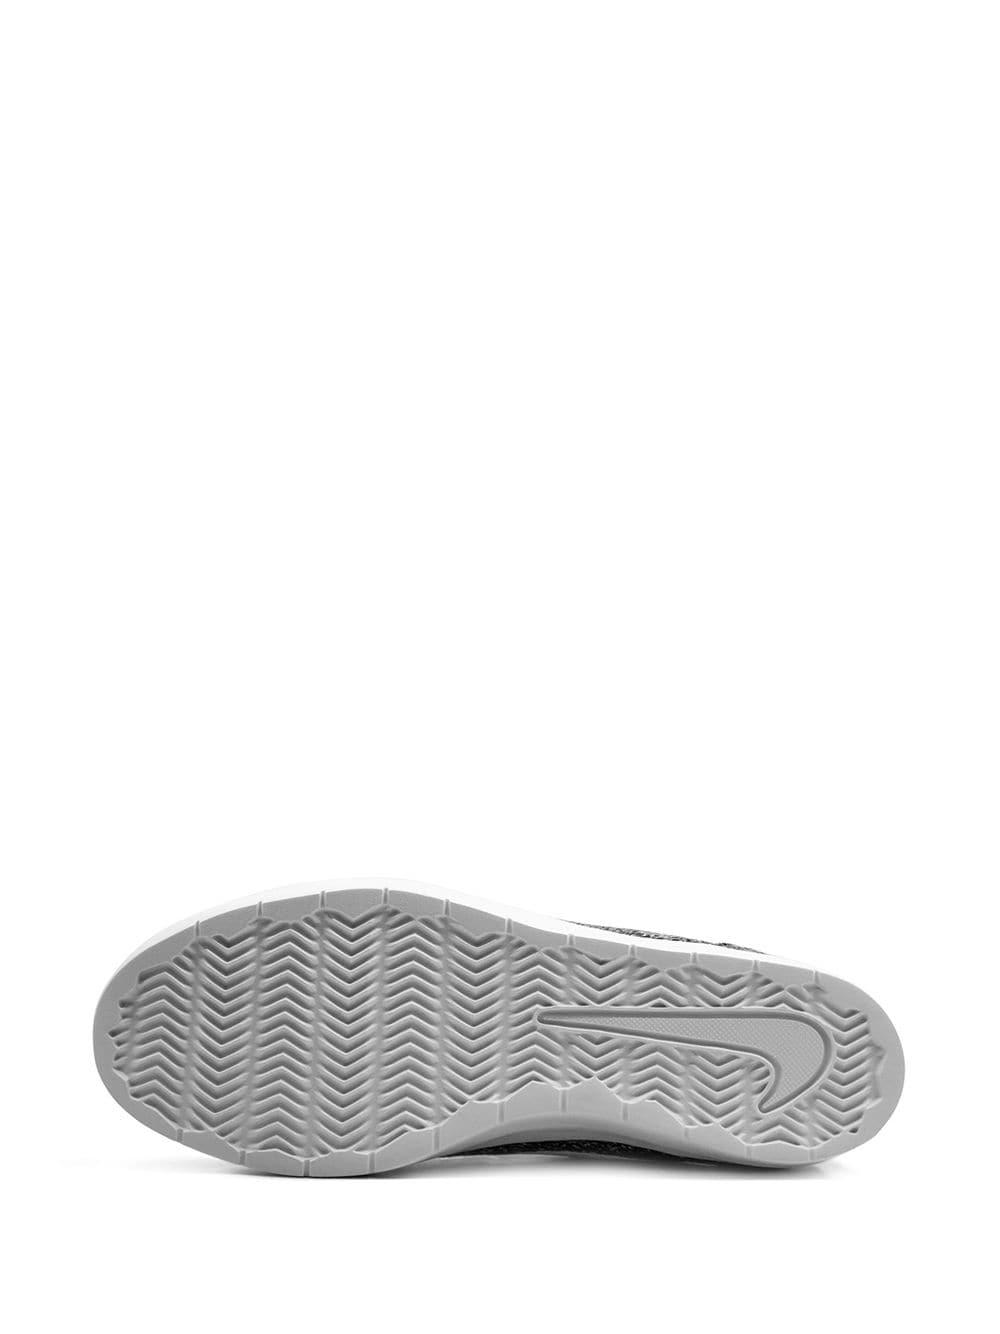 Nike Synthetic Sb Portmore 2 Ultralight Sneakers in Grey (Gray) for Men |  Lyst